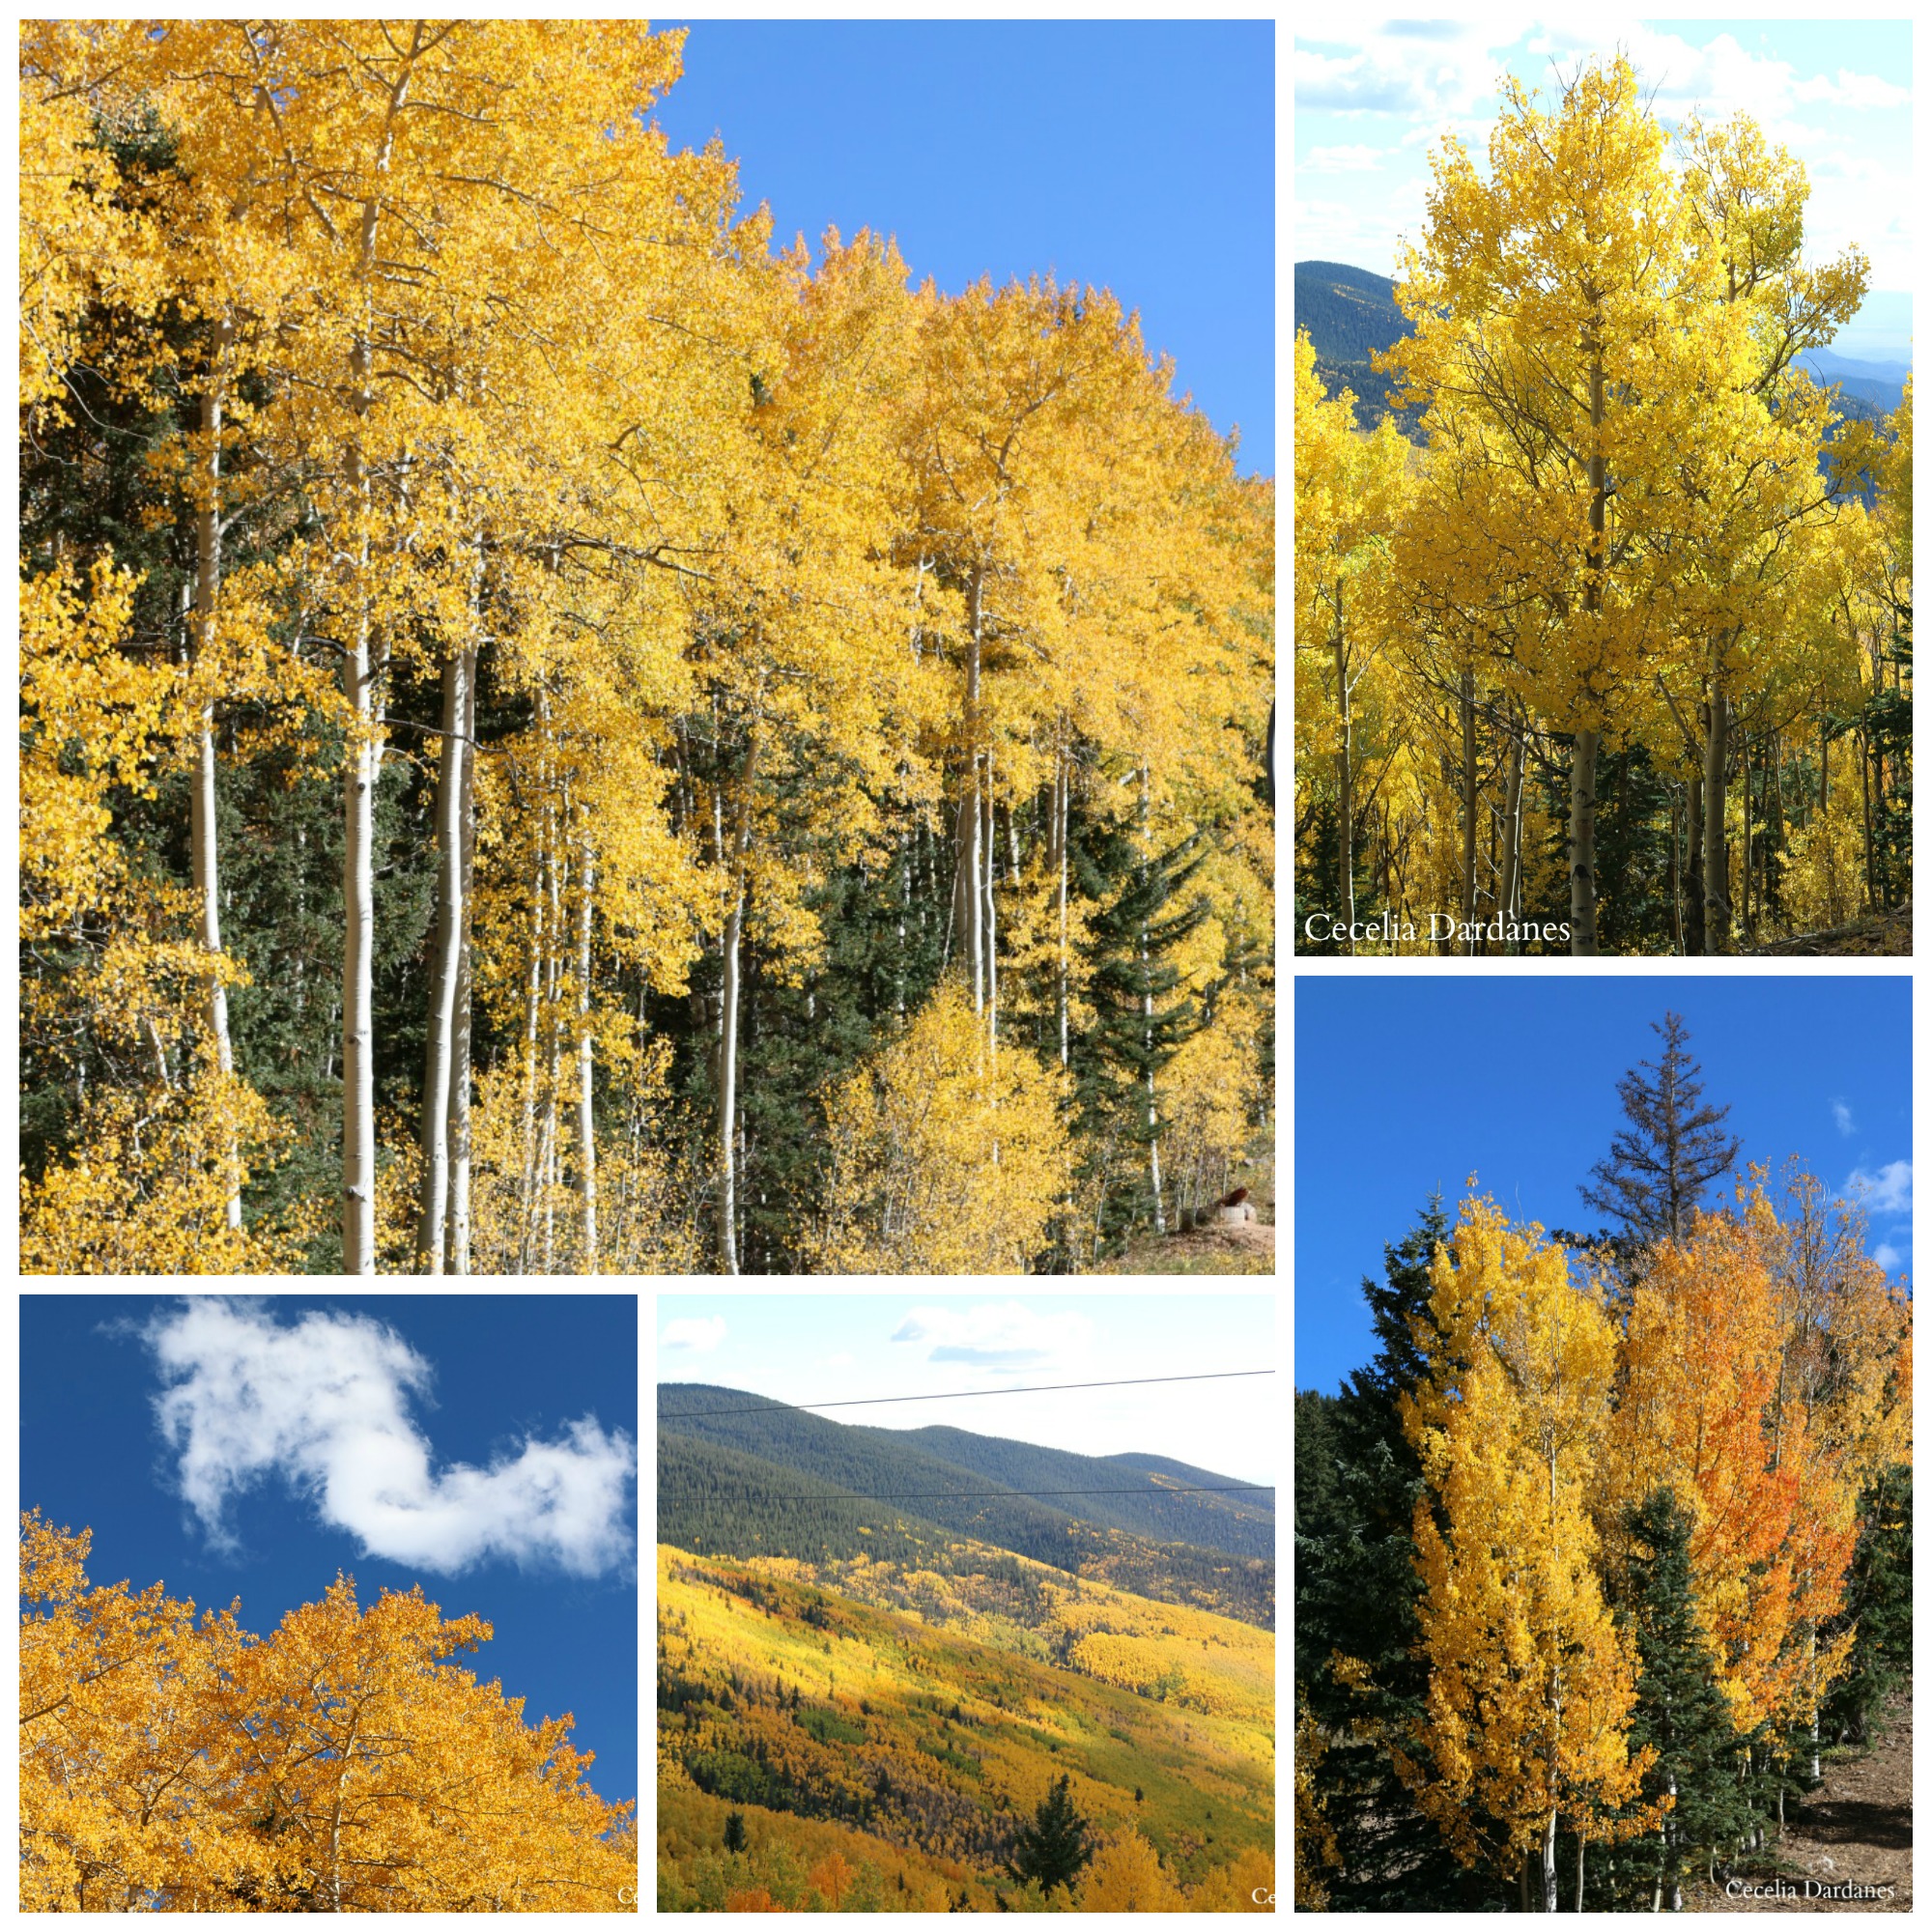 Fall in the mountains of New Mexico is so beautiful. I had friends in from out of town and we ventured up to Ski Santa Fe for the scenic chairlift ride during Balloon Fiesta. The colors were spectacular. 